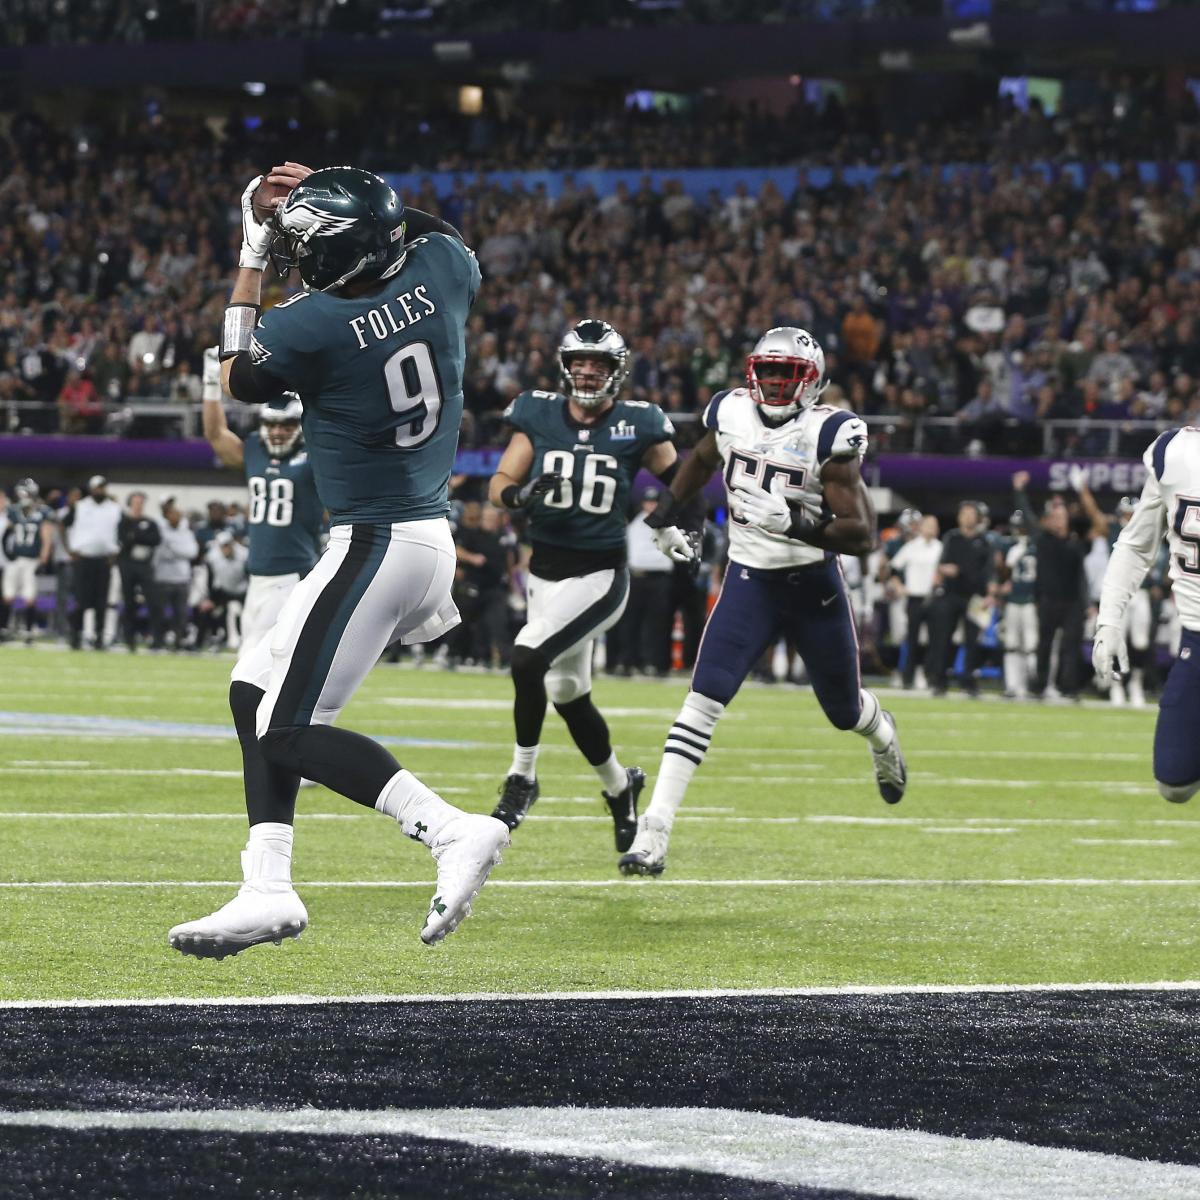 Eagles file to trademark Philly Special phrase for Super Bowl play